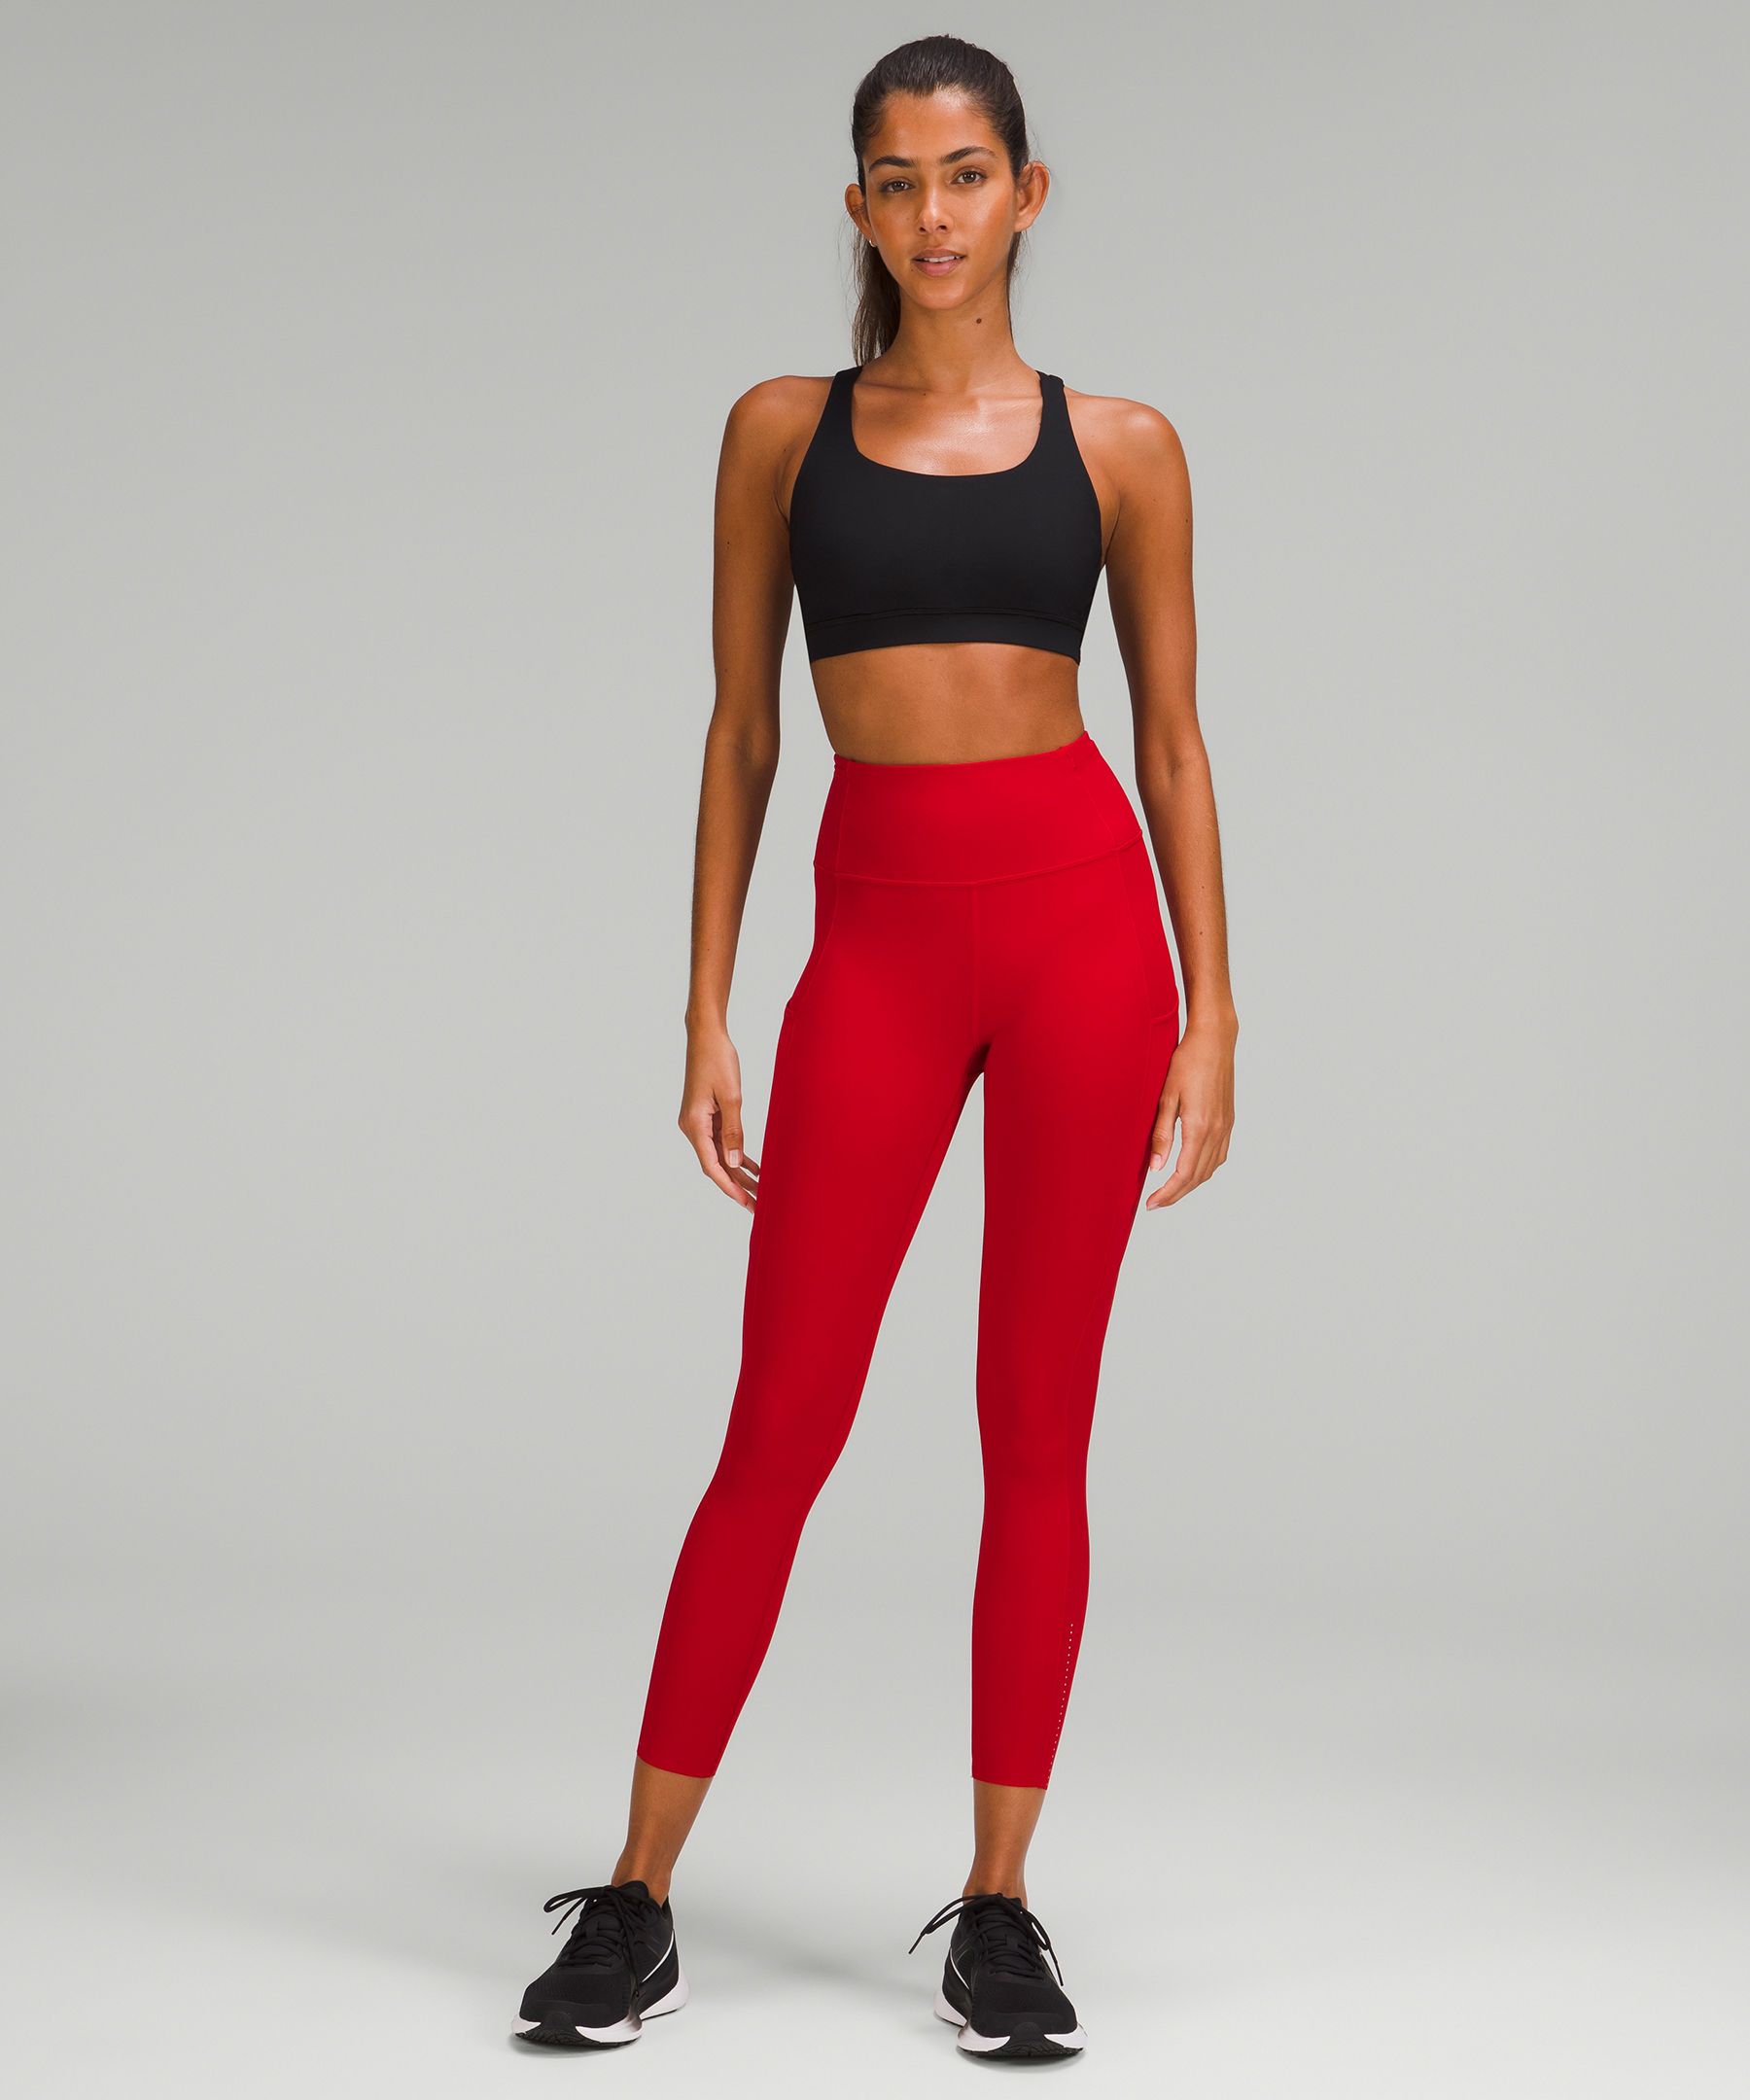 Let's Move High Rise Legging 25 - Hearth and Soul